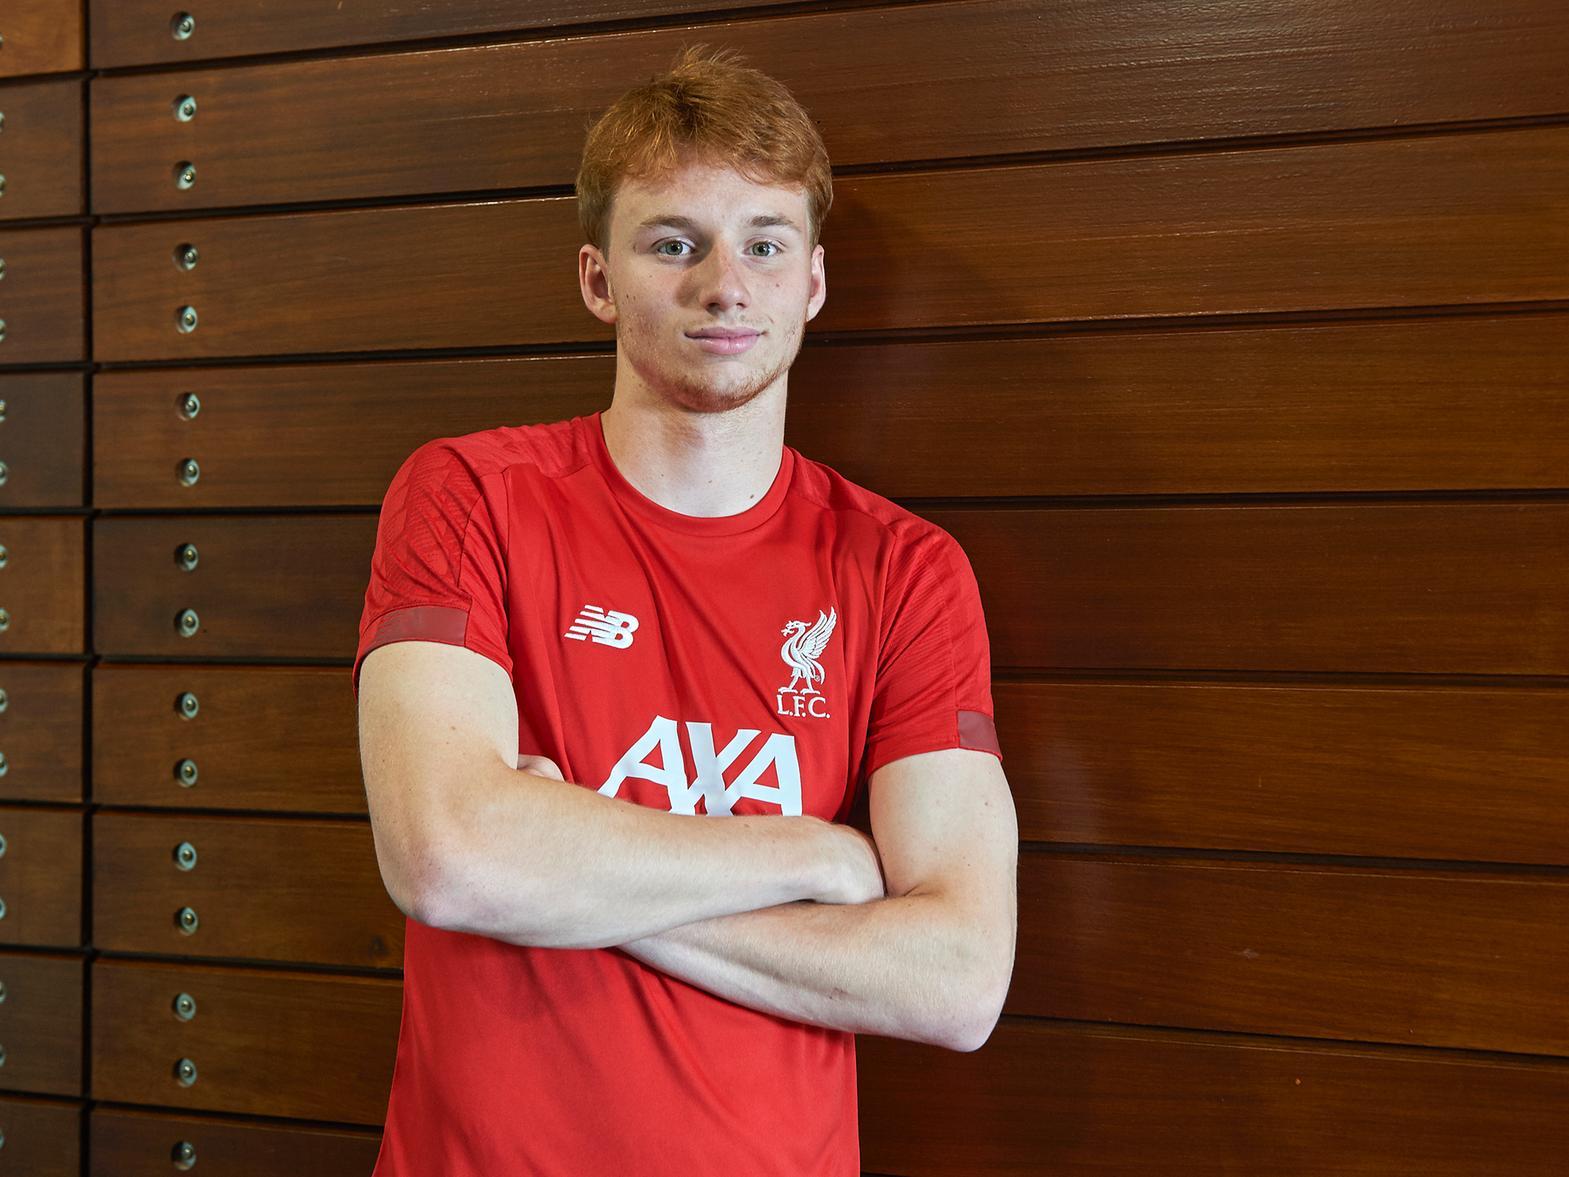 The 18-year-old defender has made just four first team appearances for Liverpools first team, a loan to League One could prove a valuable learning experience.